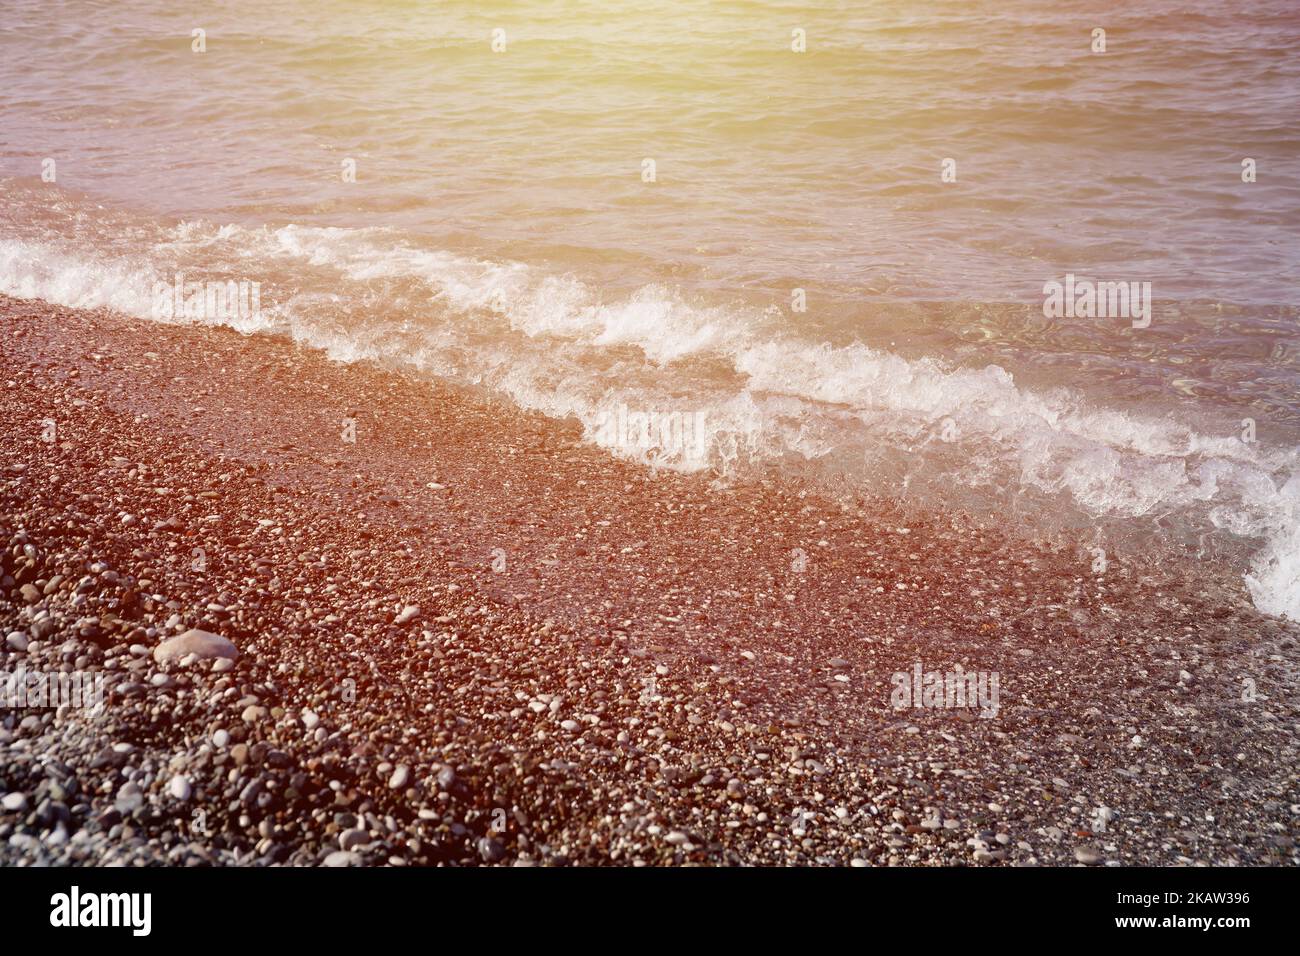 Bank of pebbles with the sea and beach in the background. Pebbles and water on the sea shore in Kemer, Antalya in Turkey Stock Photo